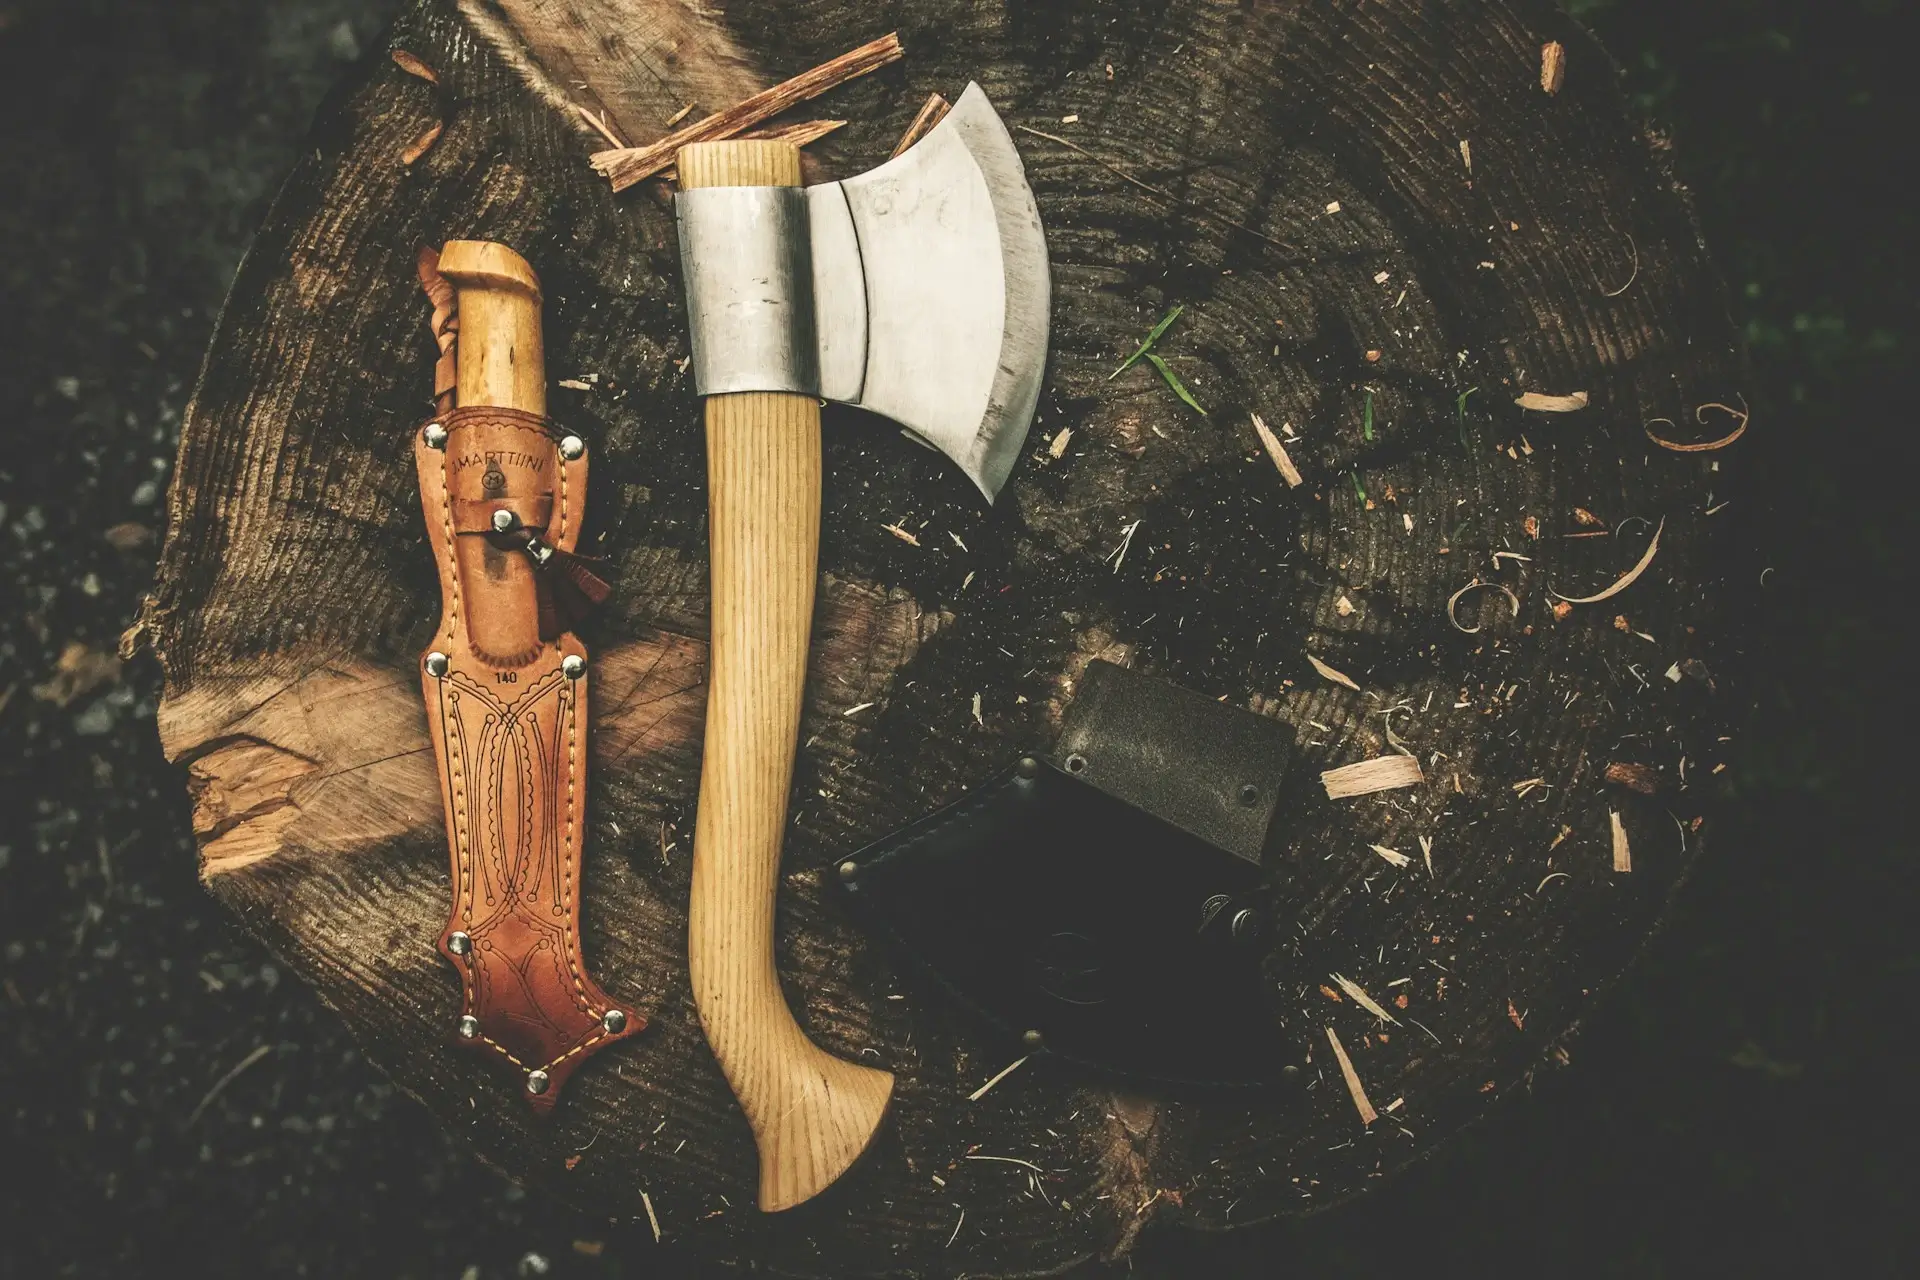 A knife and a hatchet side by side in the dirt outdoors